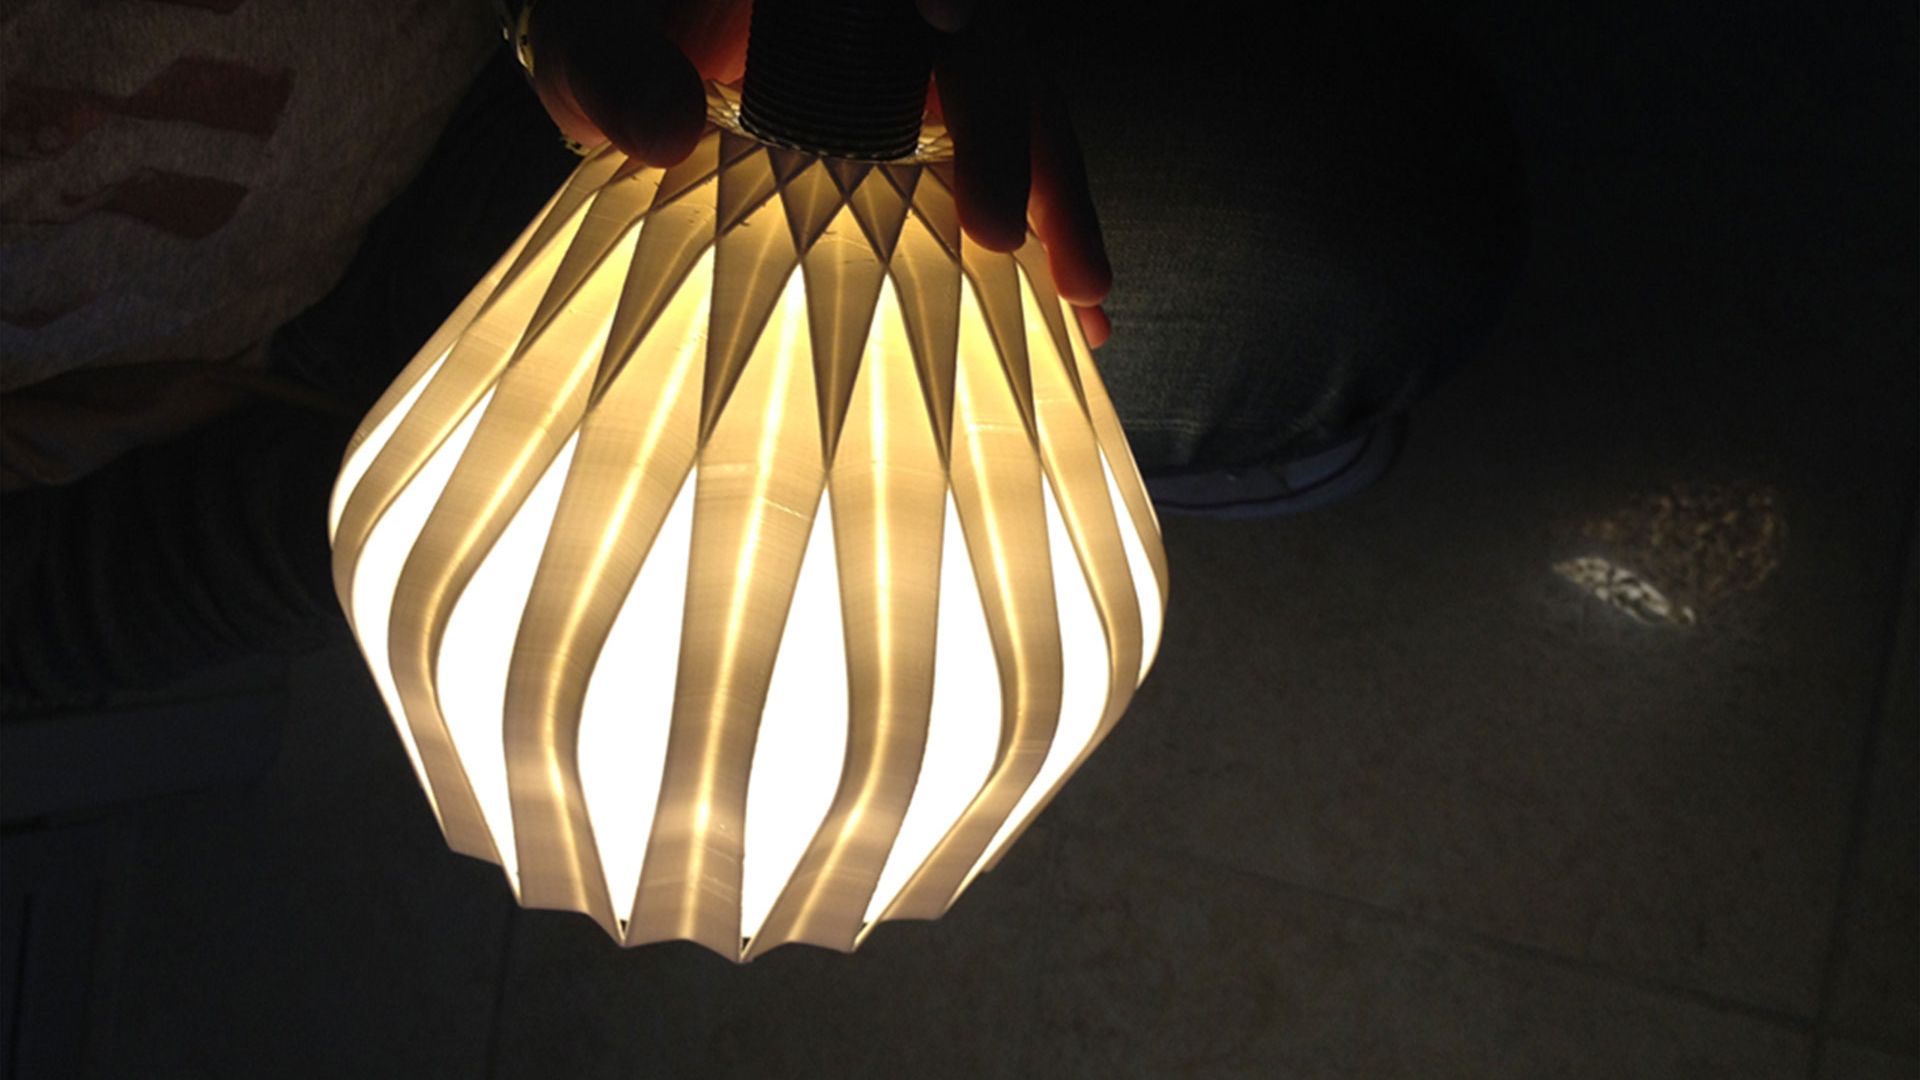 IVL up-cycling lamp #1 prototype